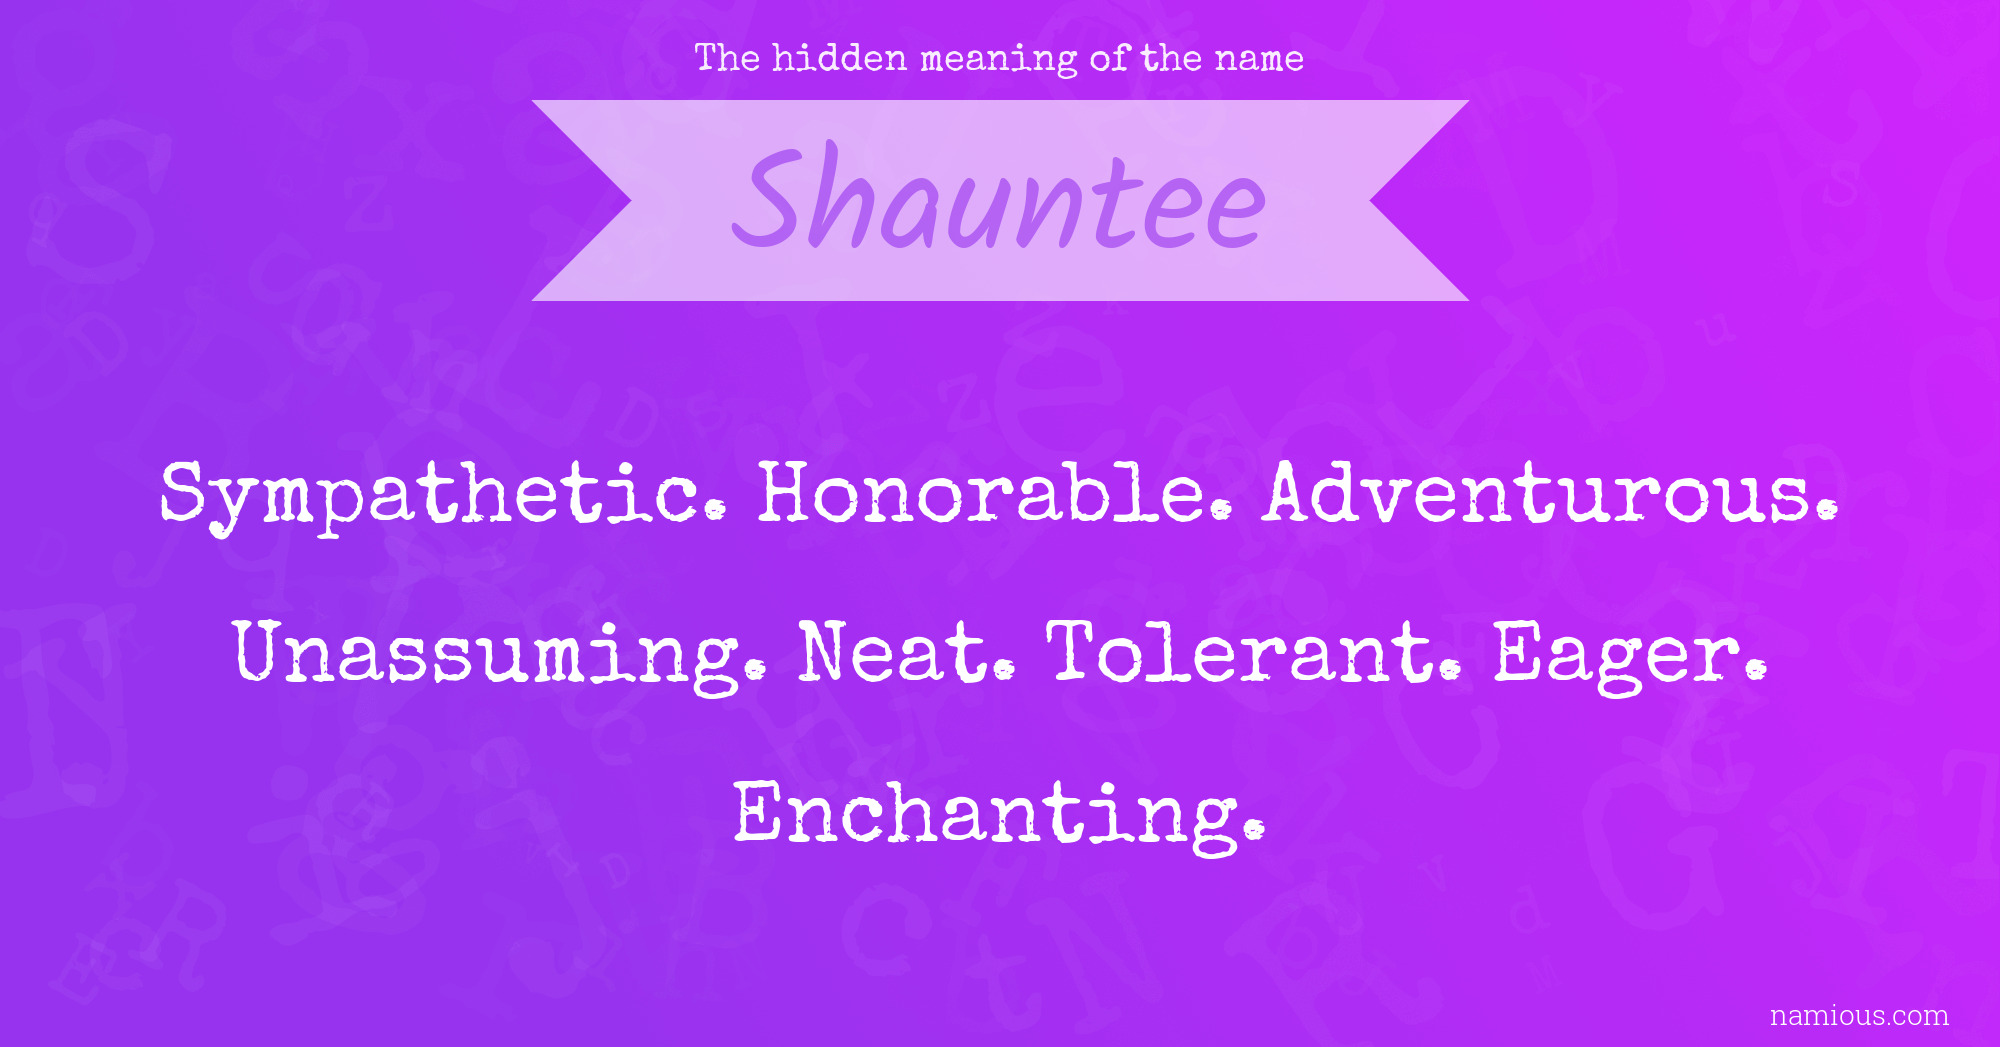 The hidden meaning of the name Shauntee